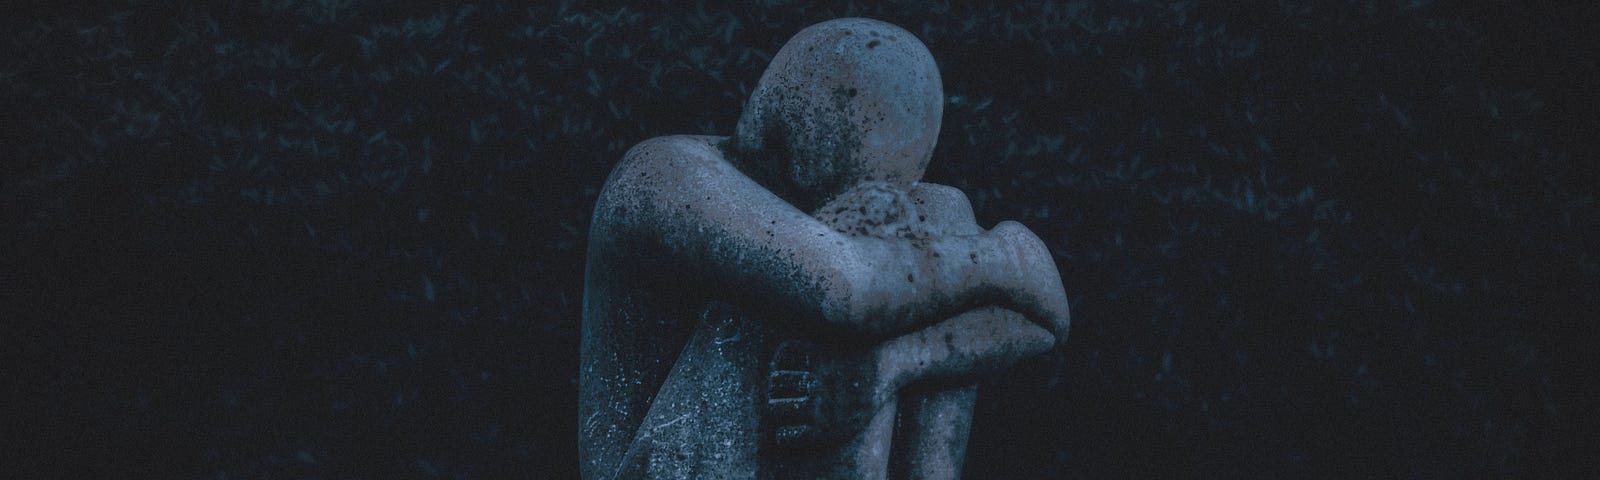 a stone statue of a human sitting down holding his knees, representing the emotion of grief